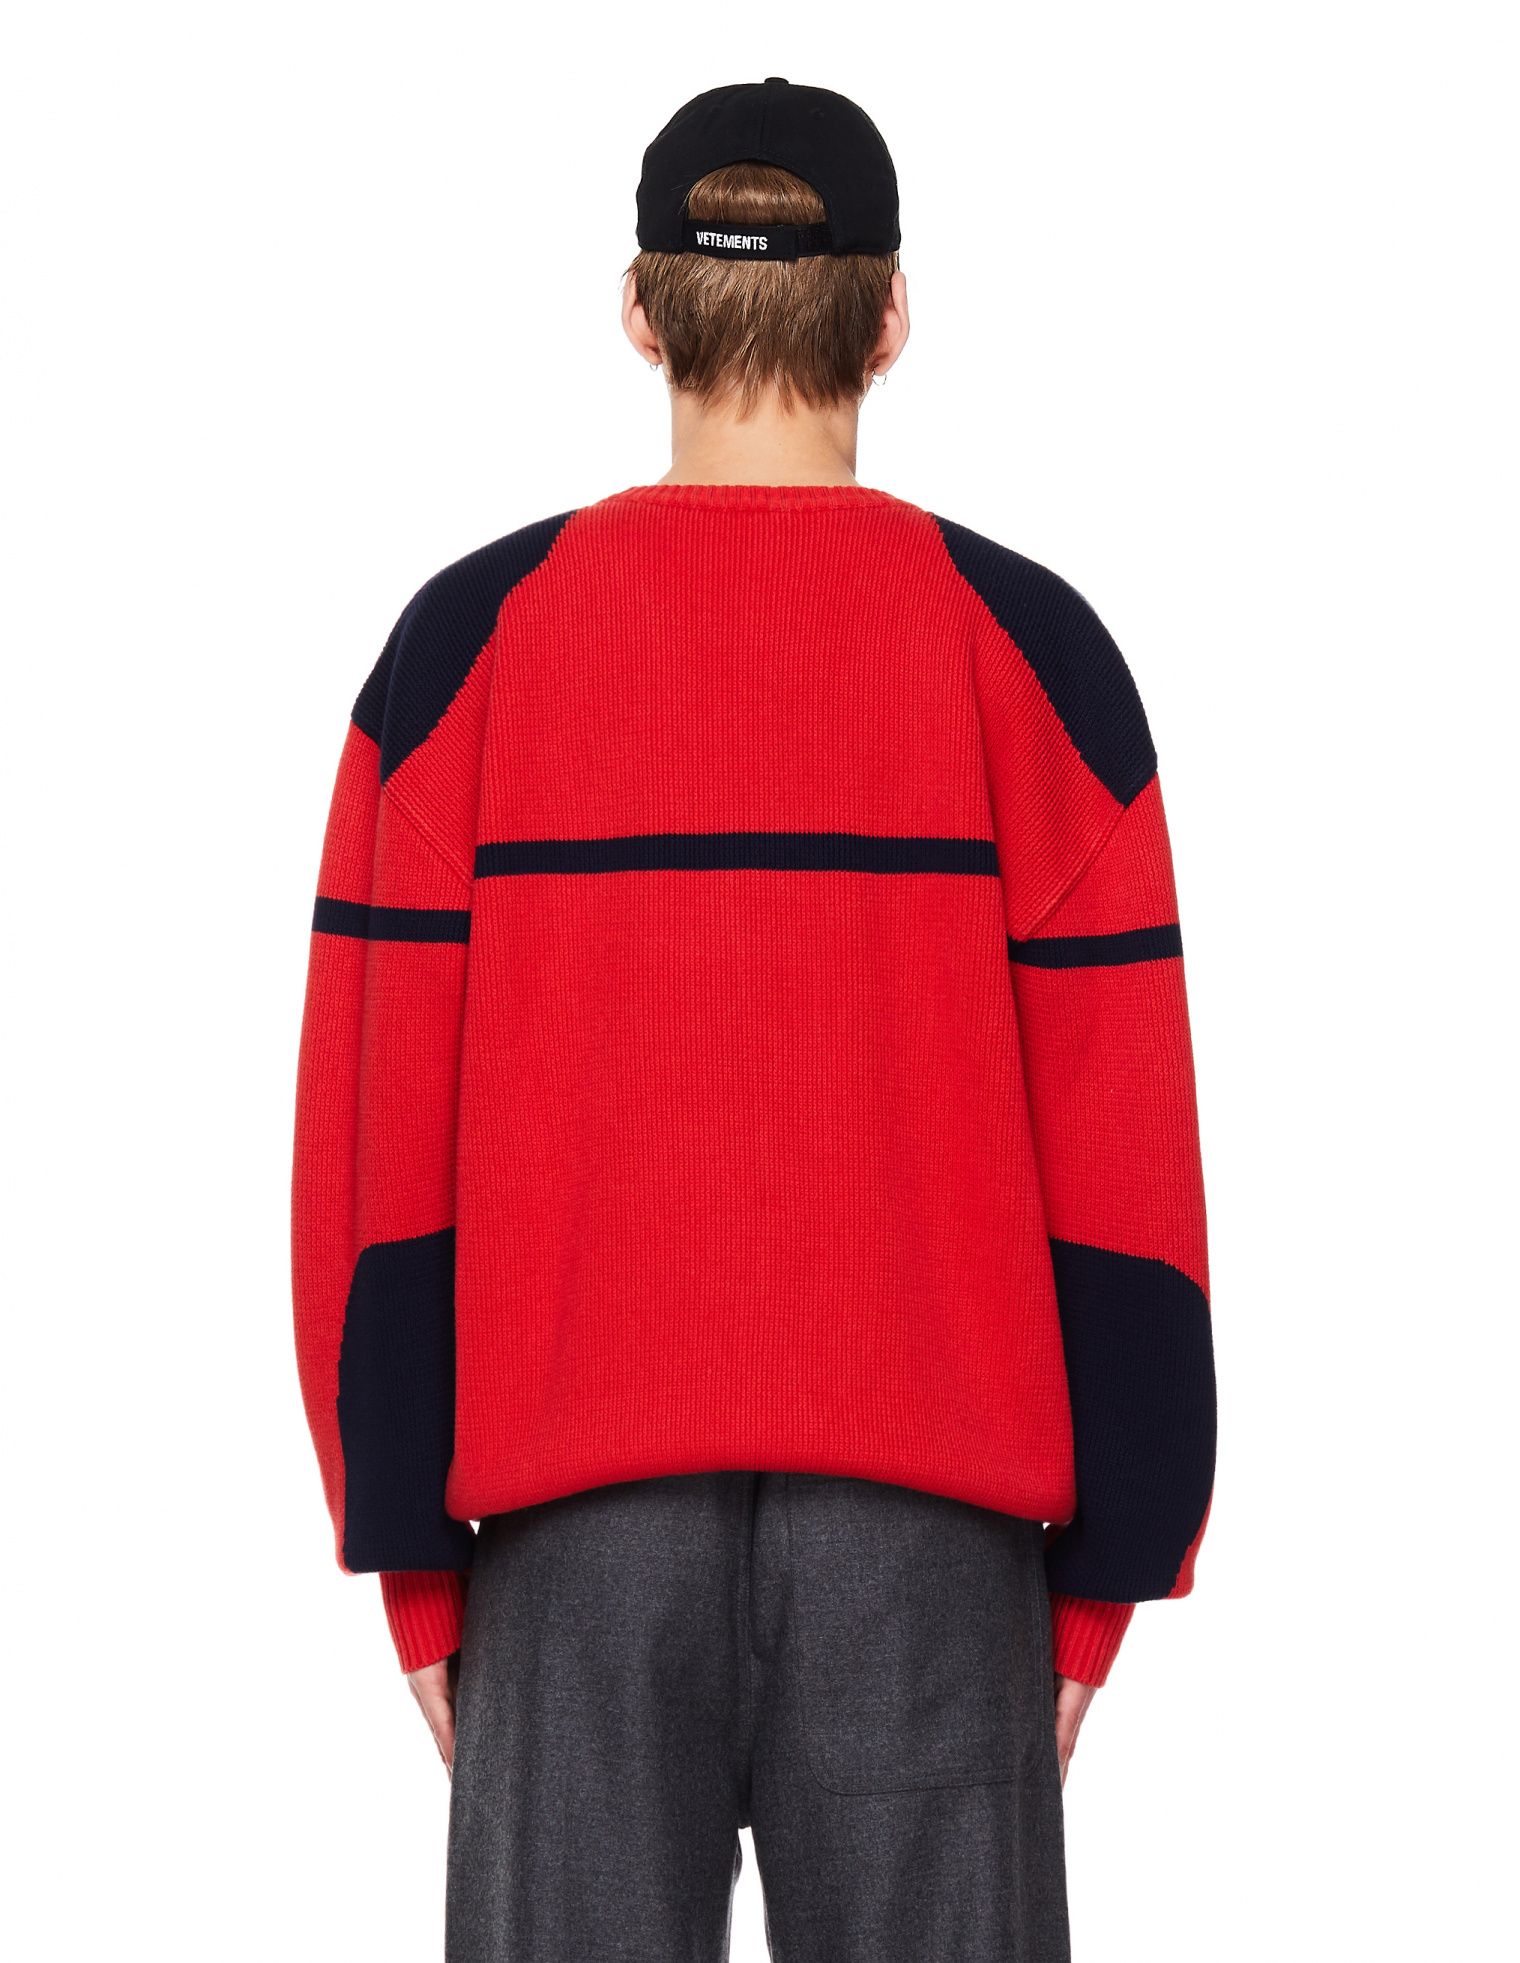 VETEMENTS Red Cotton & Cashmere Sweater